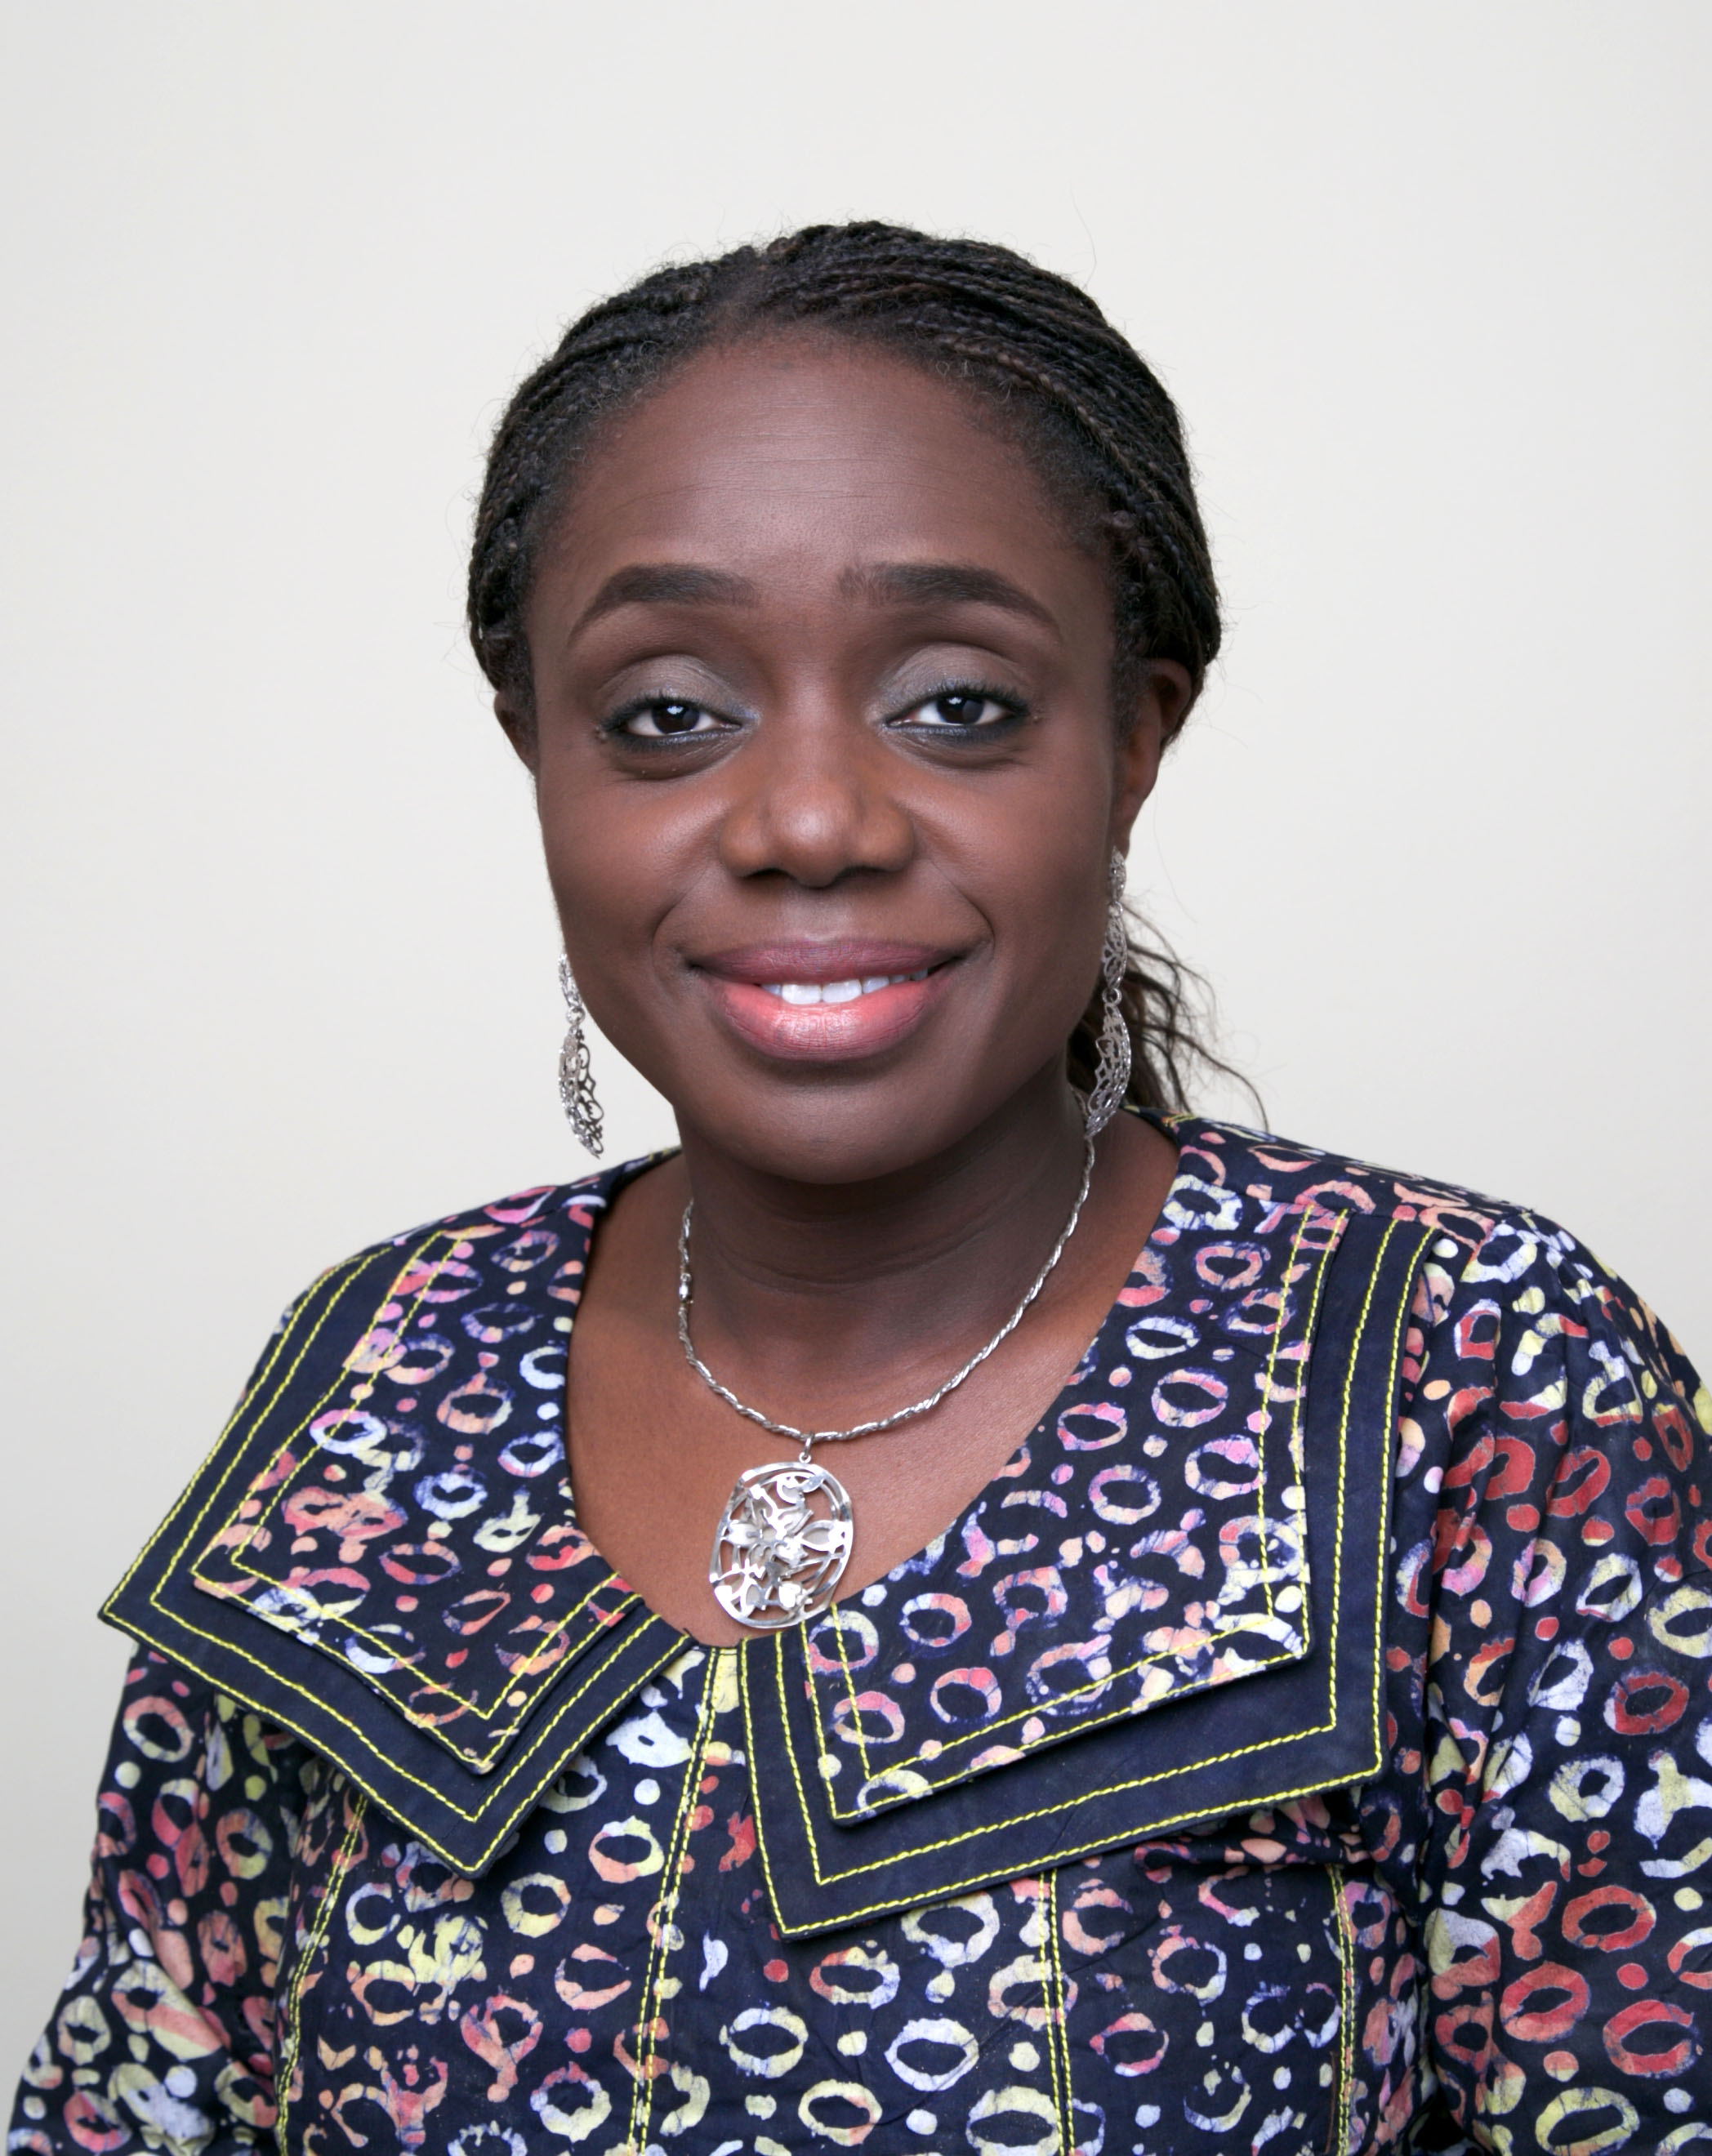 Adeosun:  We are investing in infrastructure to grow the private sector